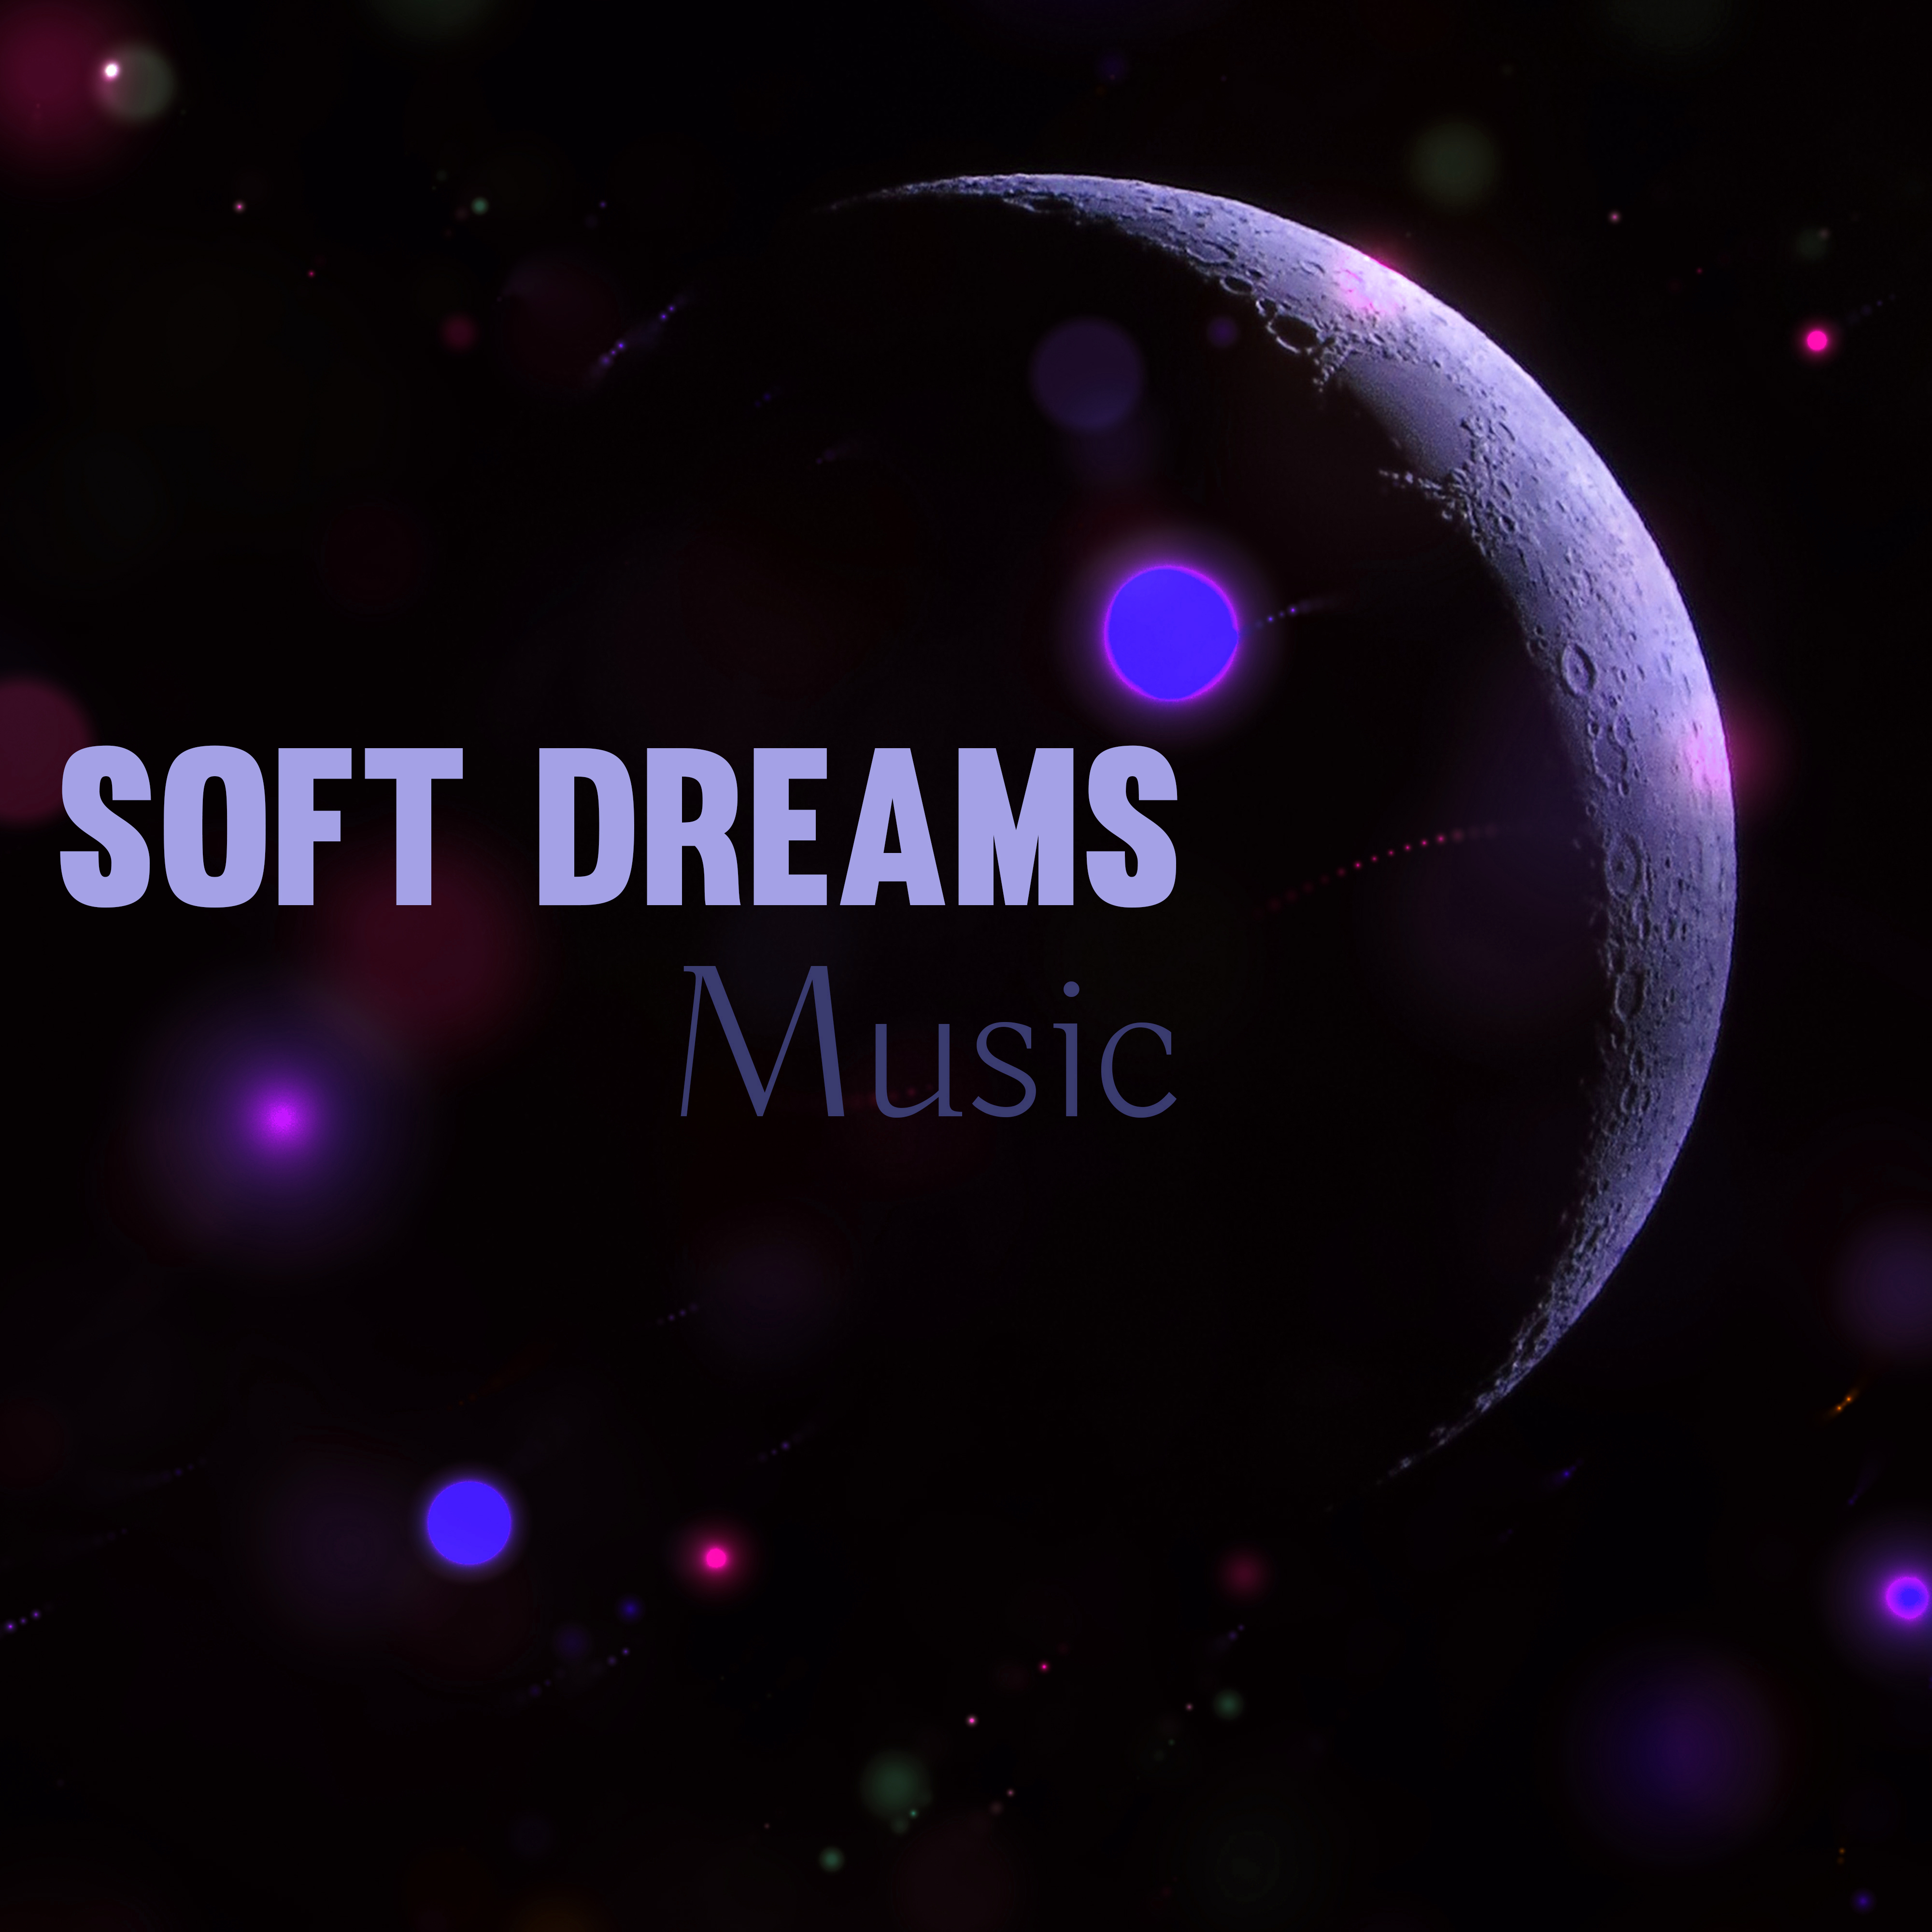 Soft Dreams Music – Relaxing Music, Calming Sounds of Nature, Tranquility Songs for Sleep